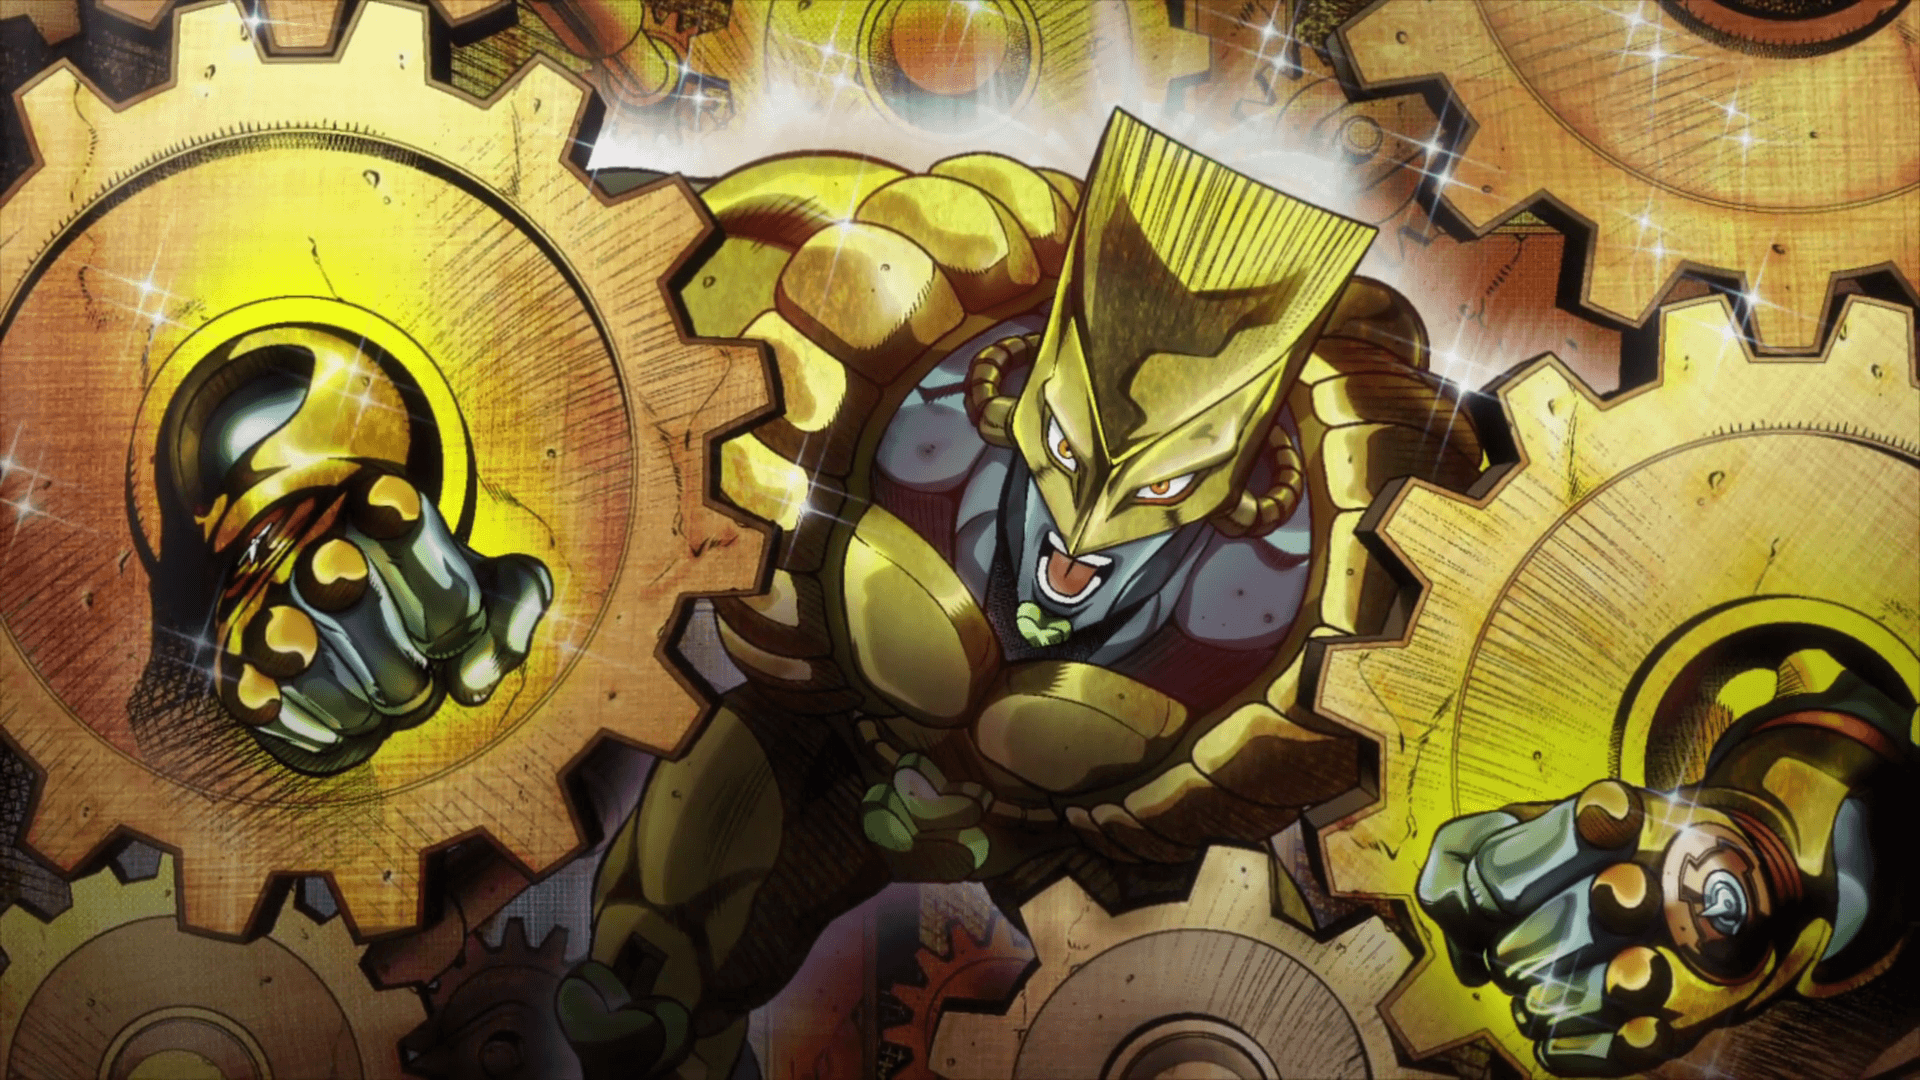 11 Dio Brando Wallpapers for iPhone and Android by Randall Burton